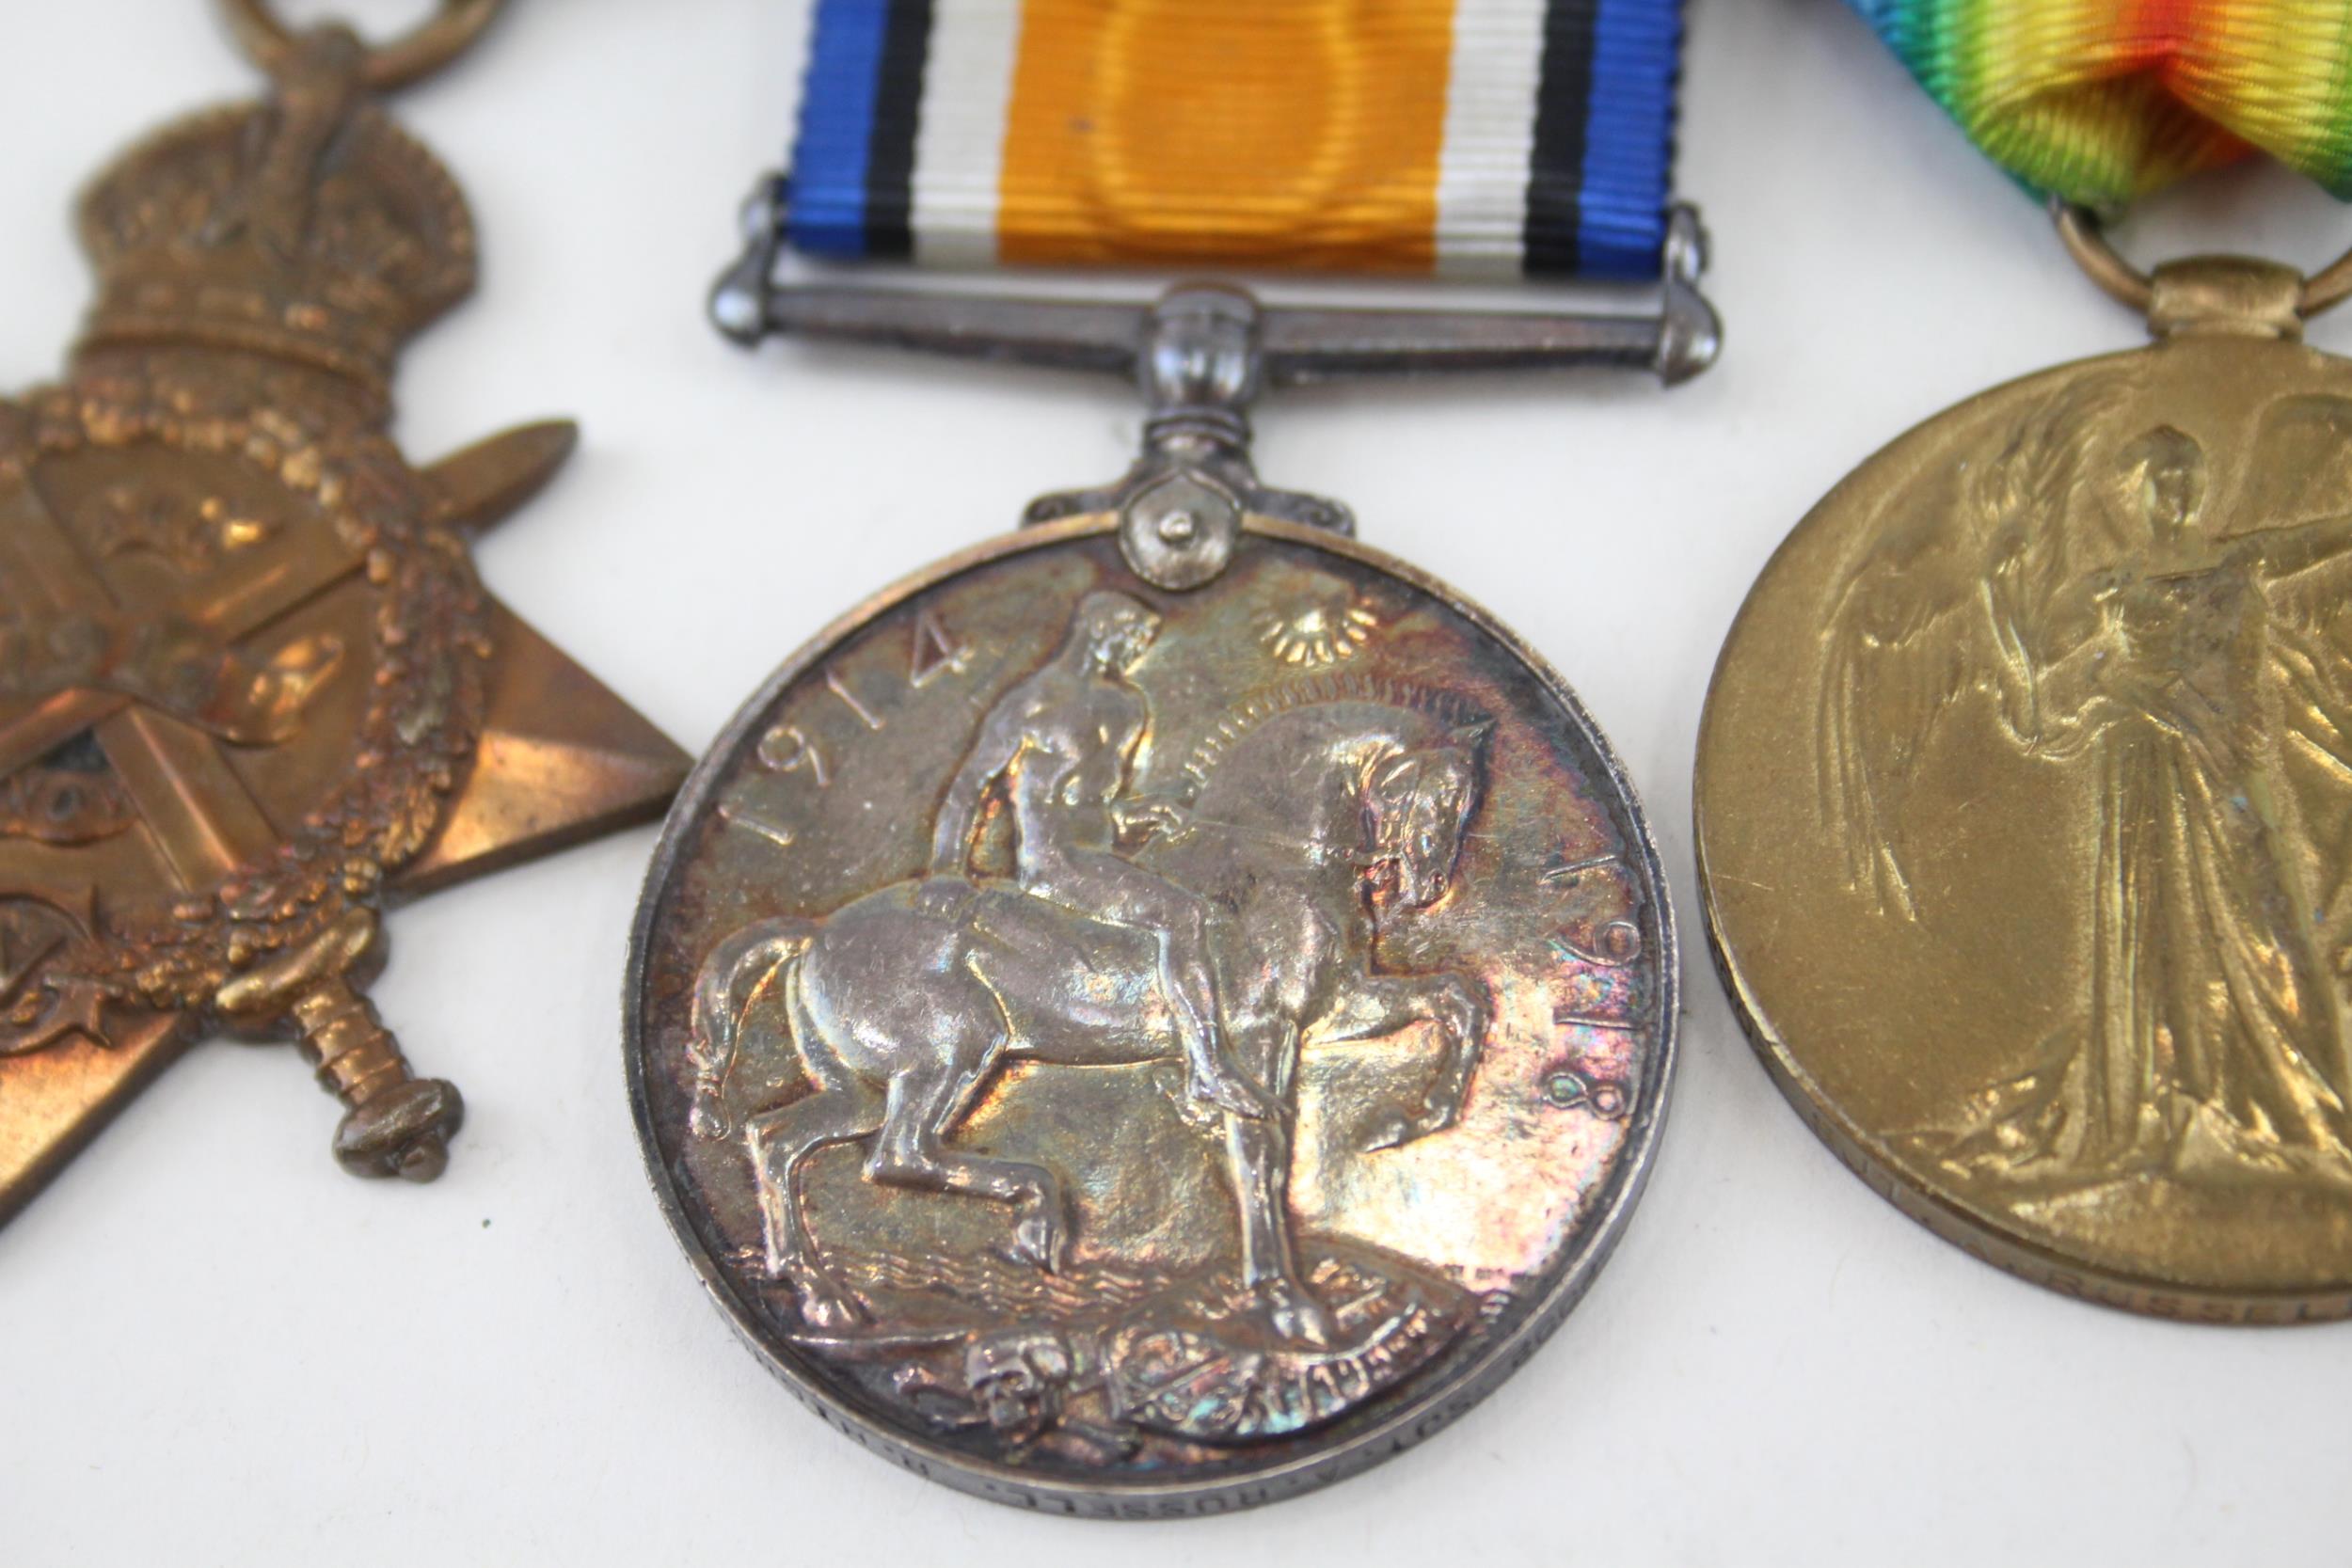 WW1 1914 Mons Star - Territorial Medal Mounted Group - WW1 1914 Mons Star - Territorial Medal - Image 3 of 8